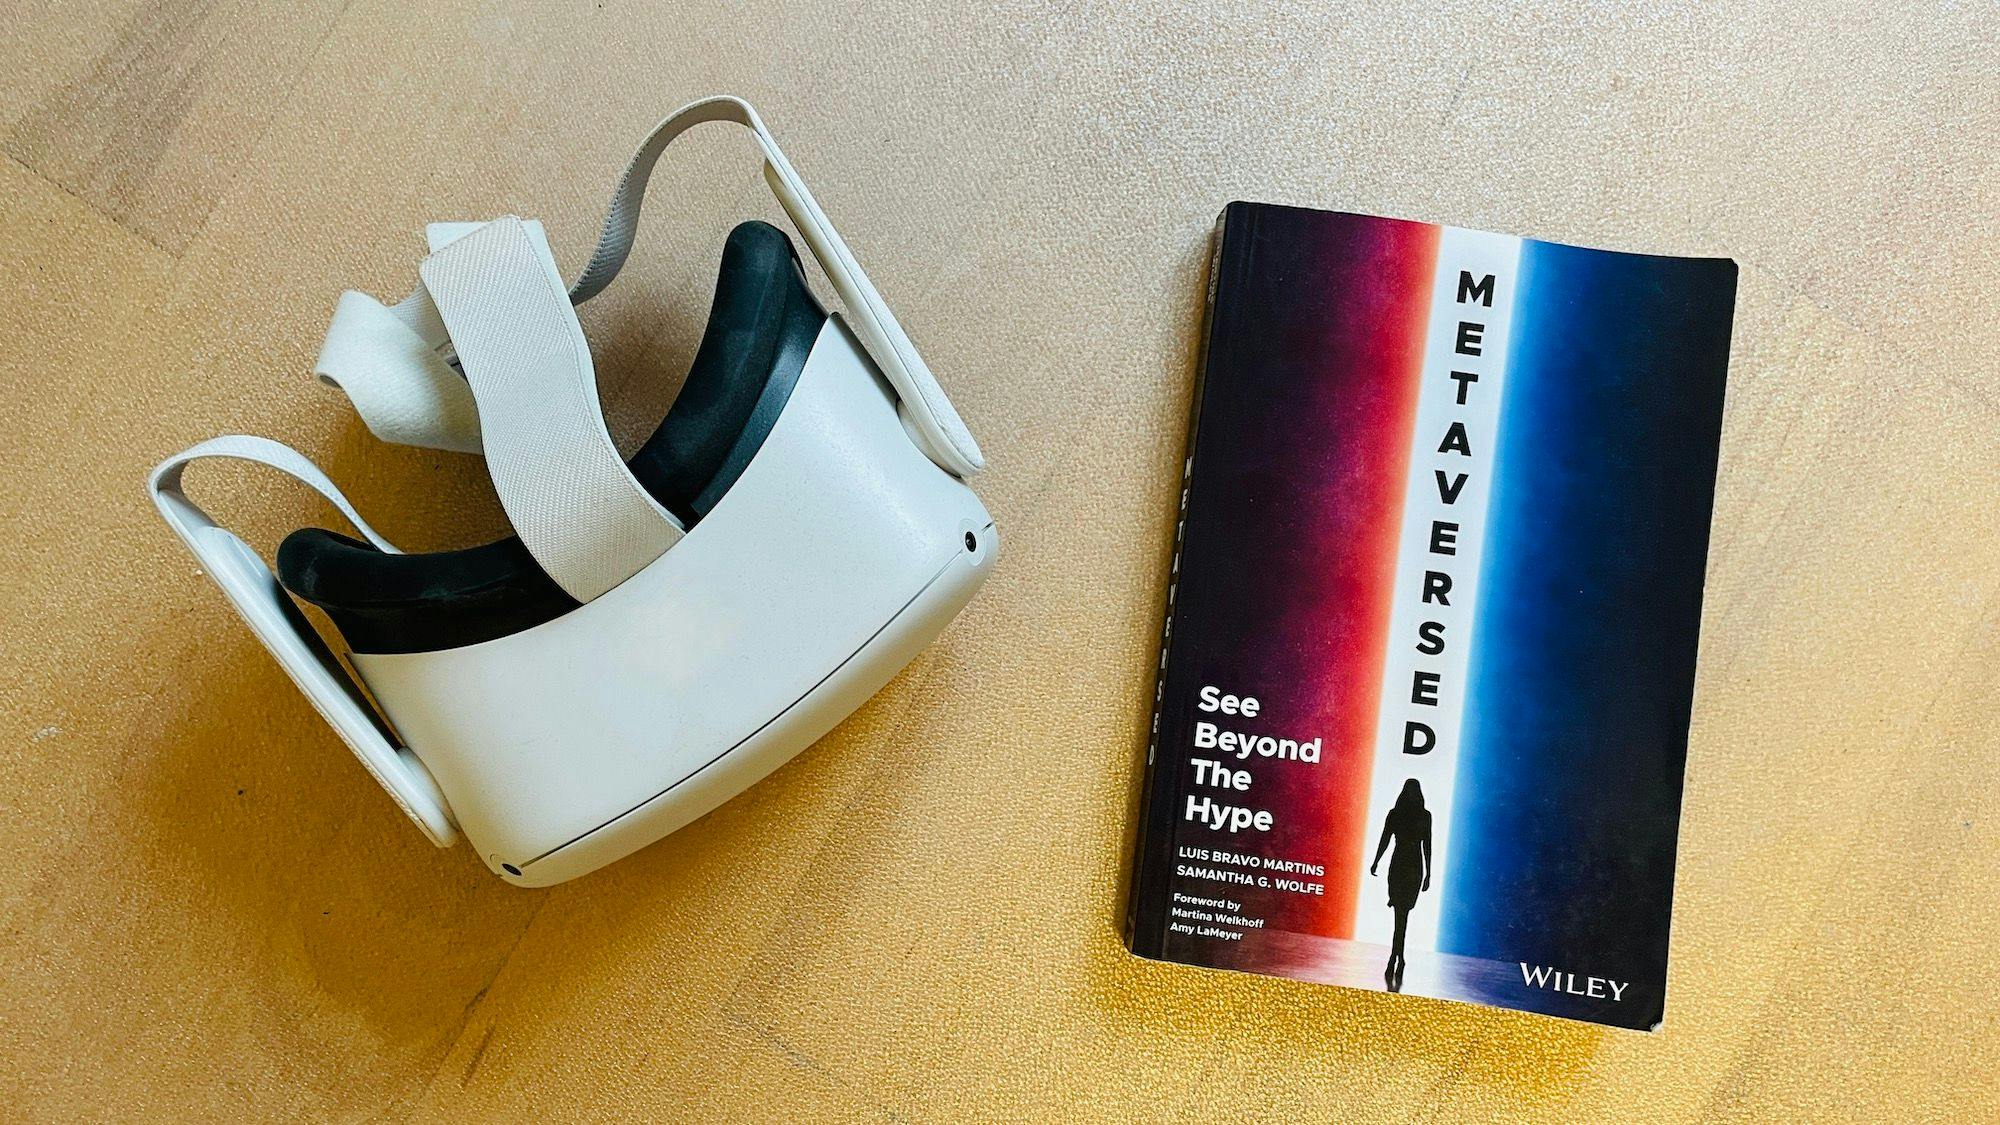 A photo of a modern XR headset next to a copy of "Metaversed"